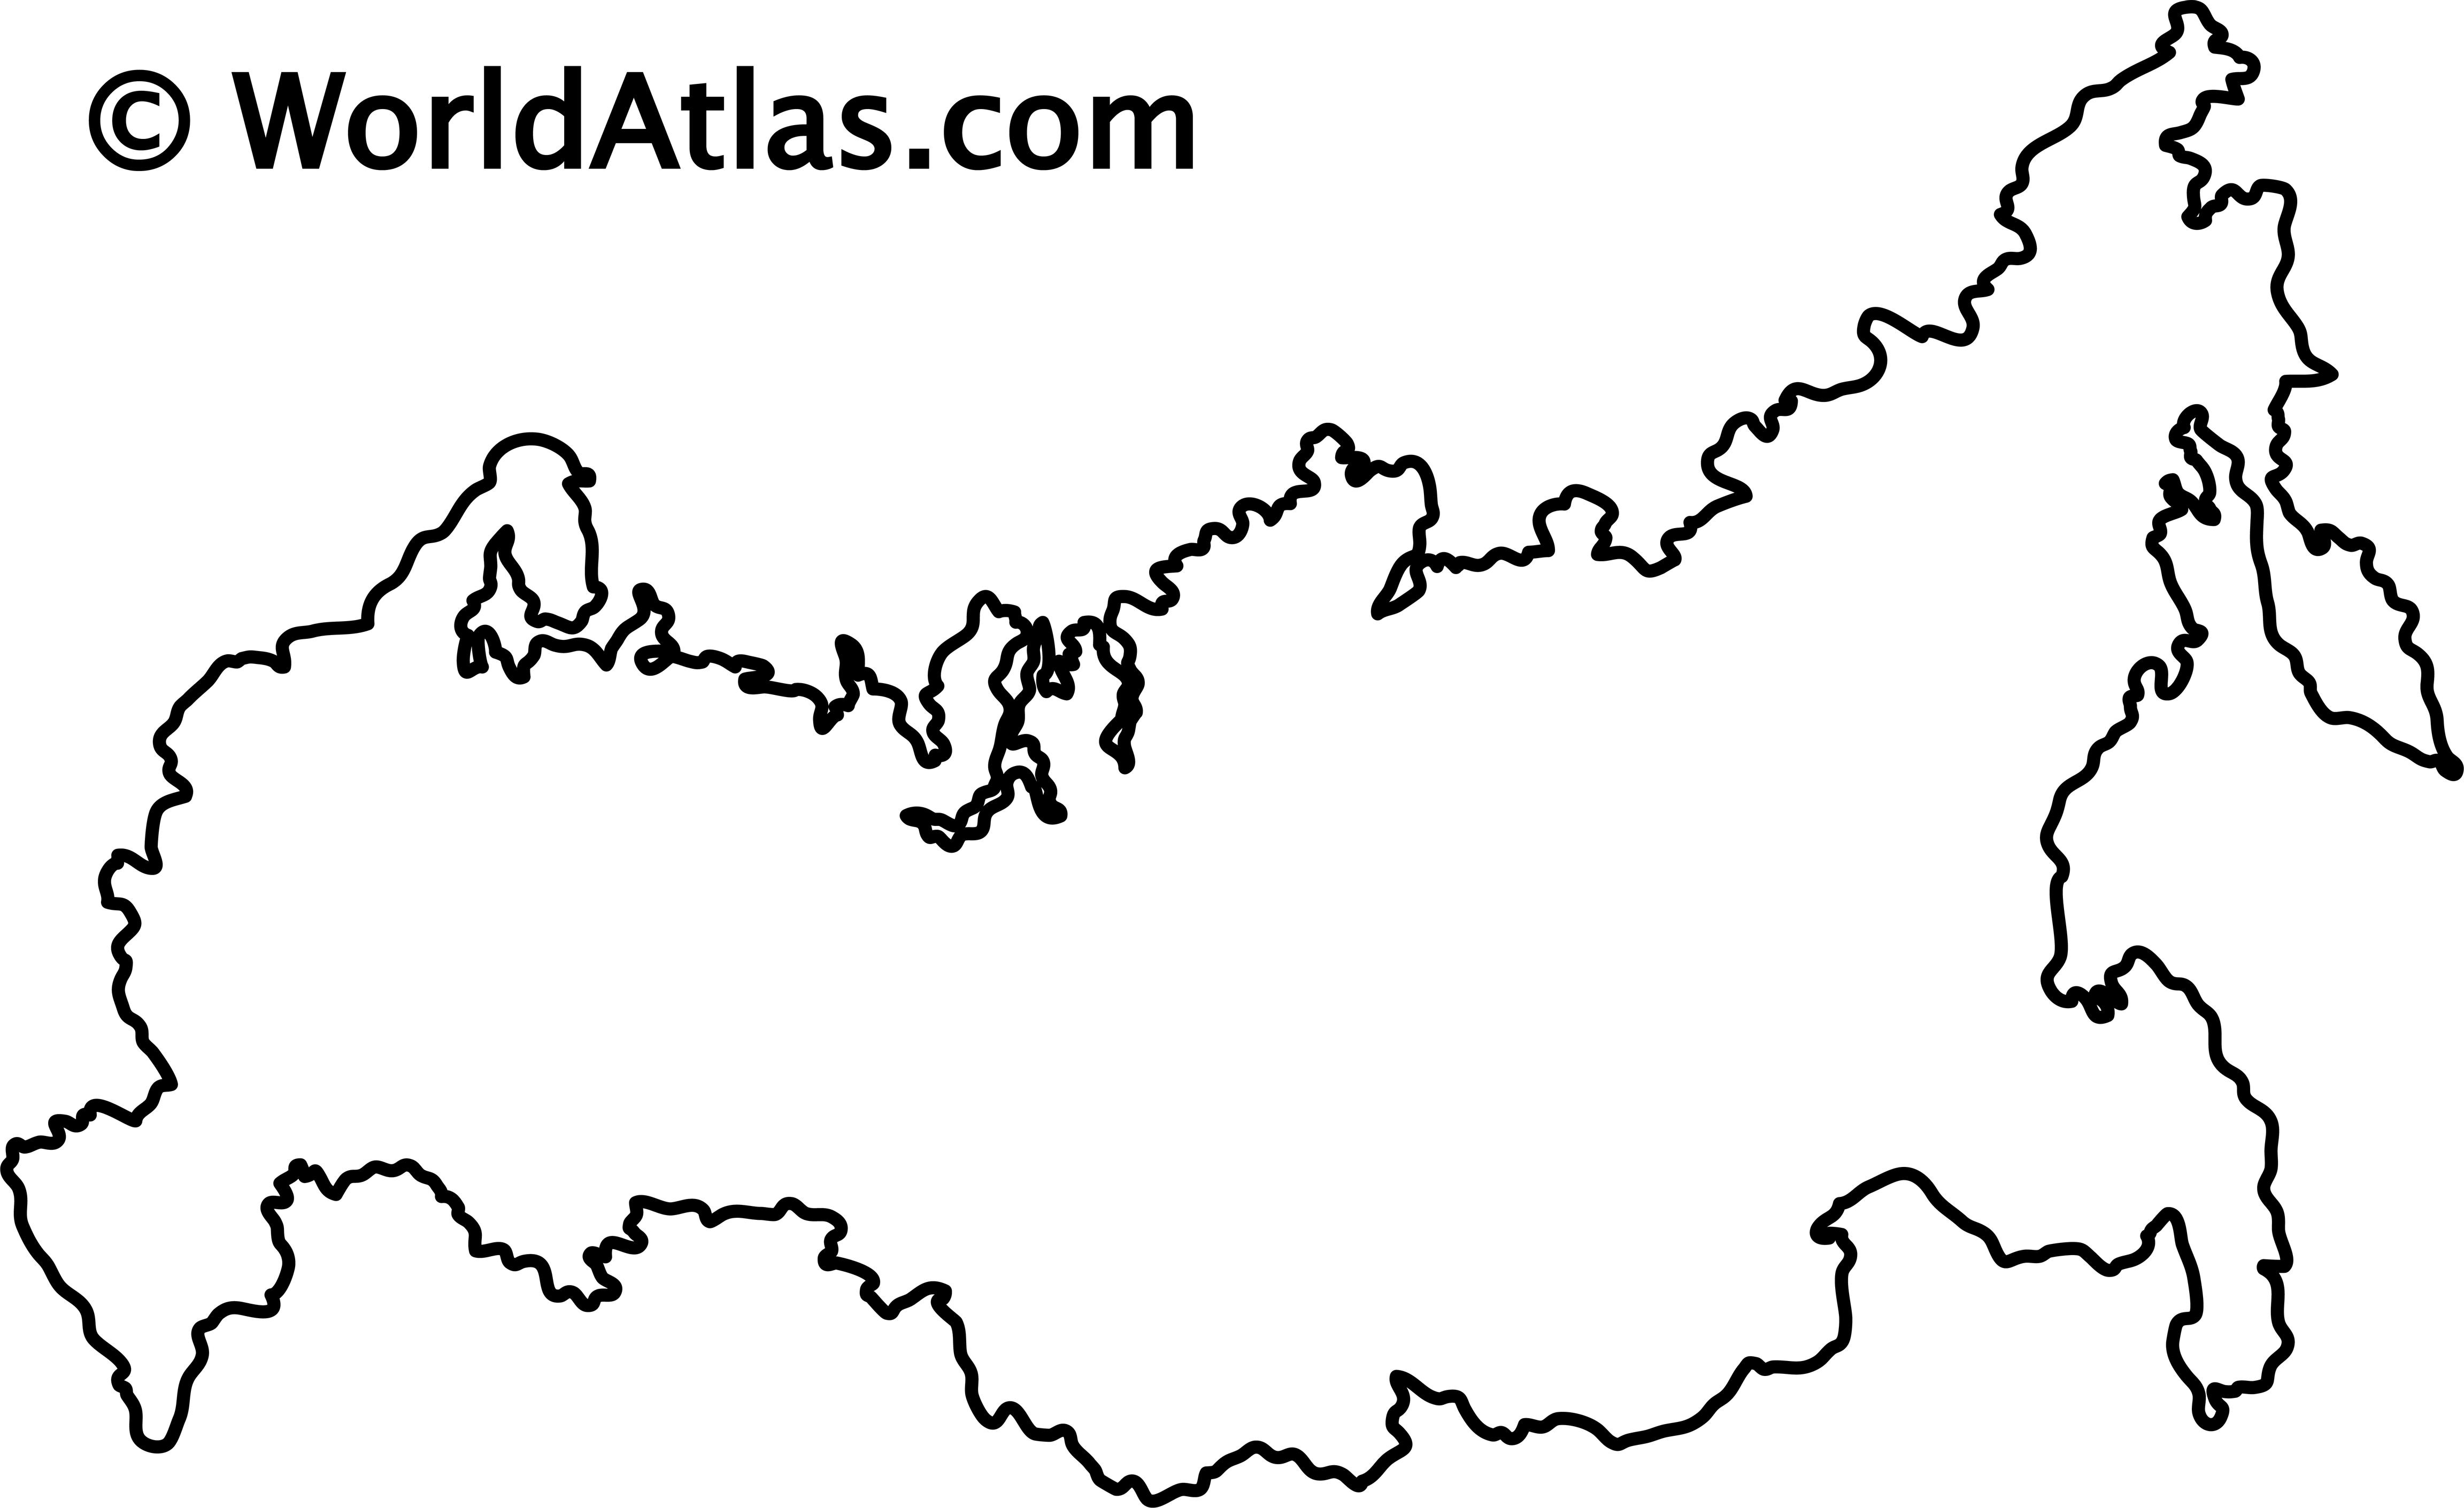 russia-russian-federation-outline-map